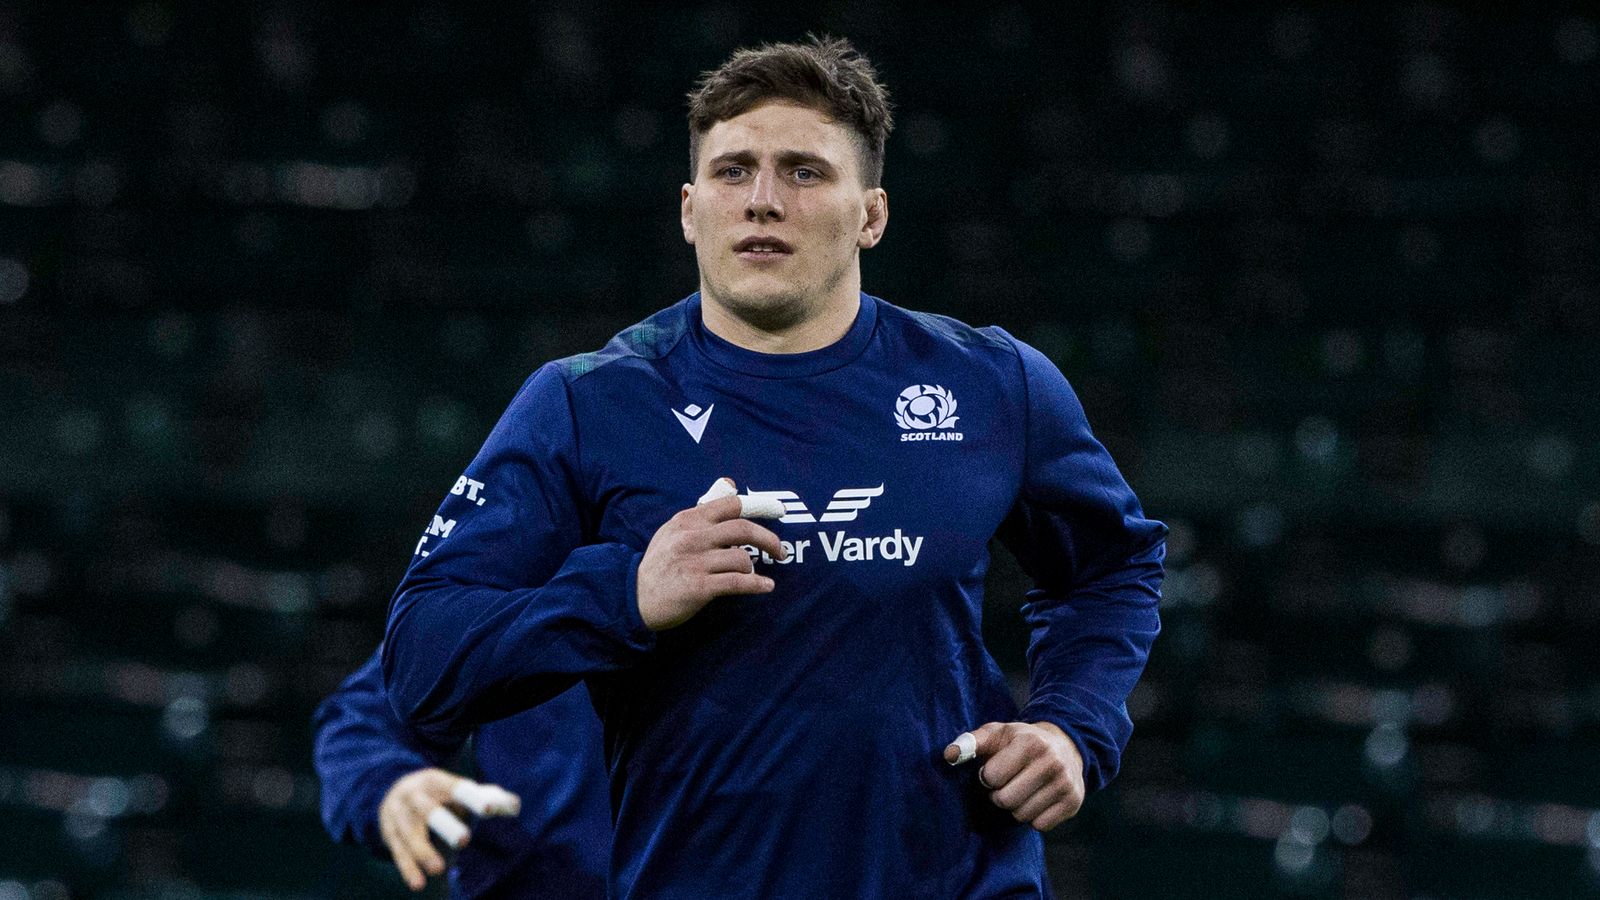 Six Nations: Scotland select Rory Darge, Grant Gilchrist to replace injured Luke Crosbie, Richie Gray in team vs France | Rugby Union News